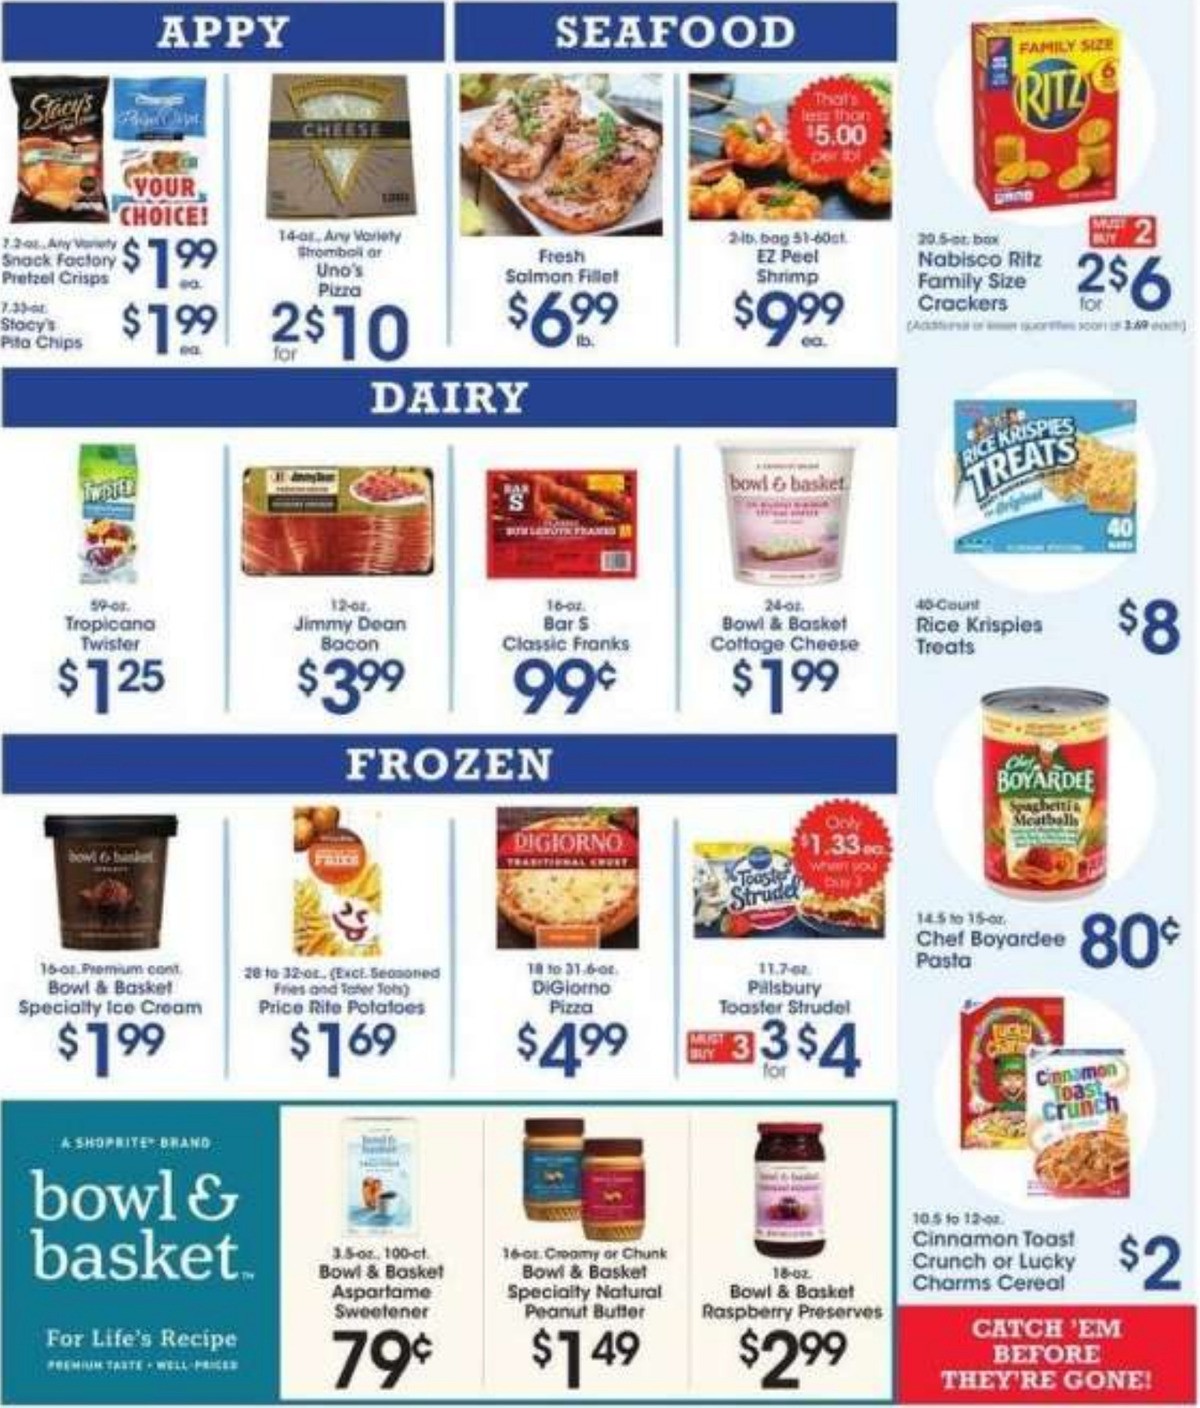 Price Rite Weekly Ad from March 12